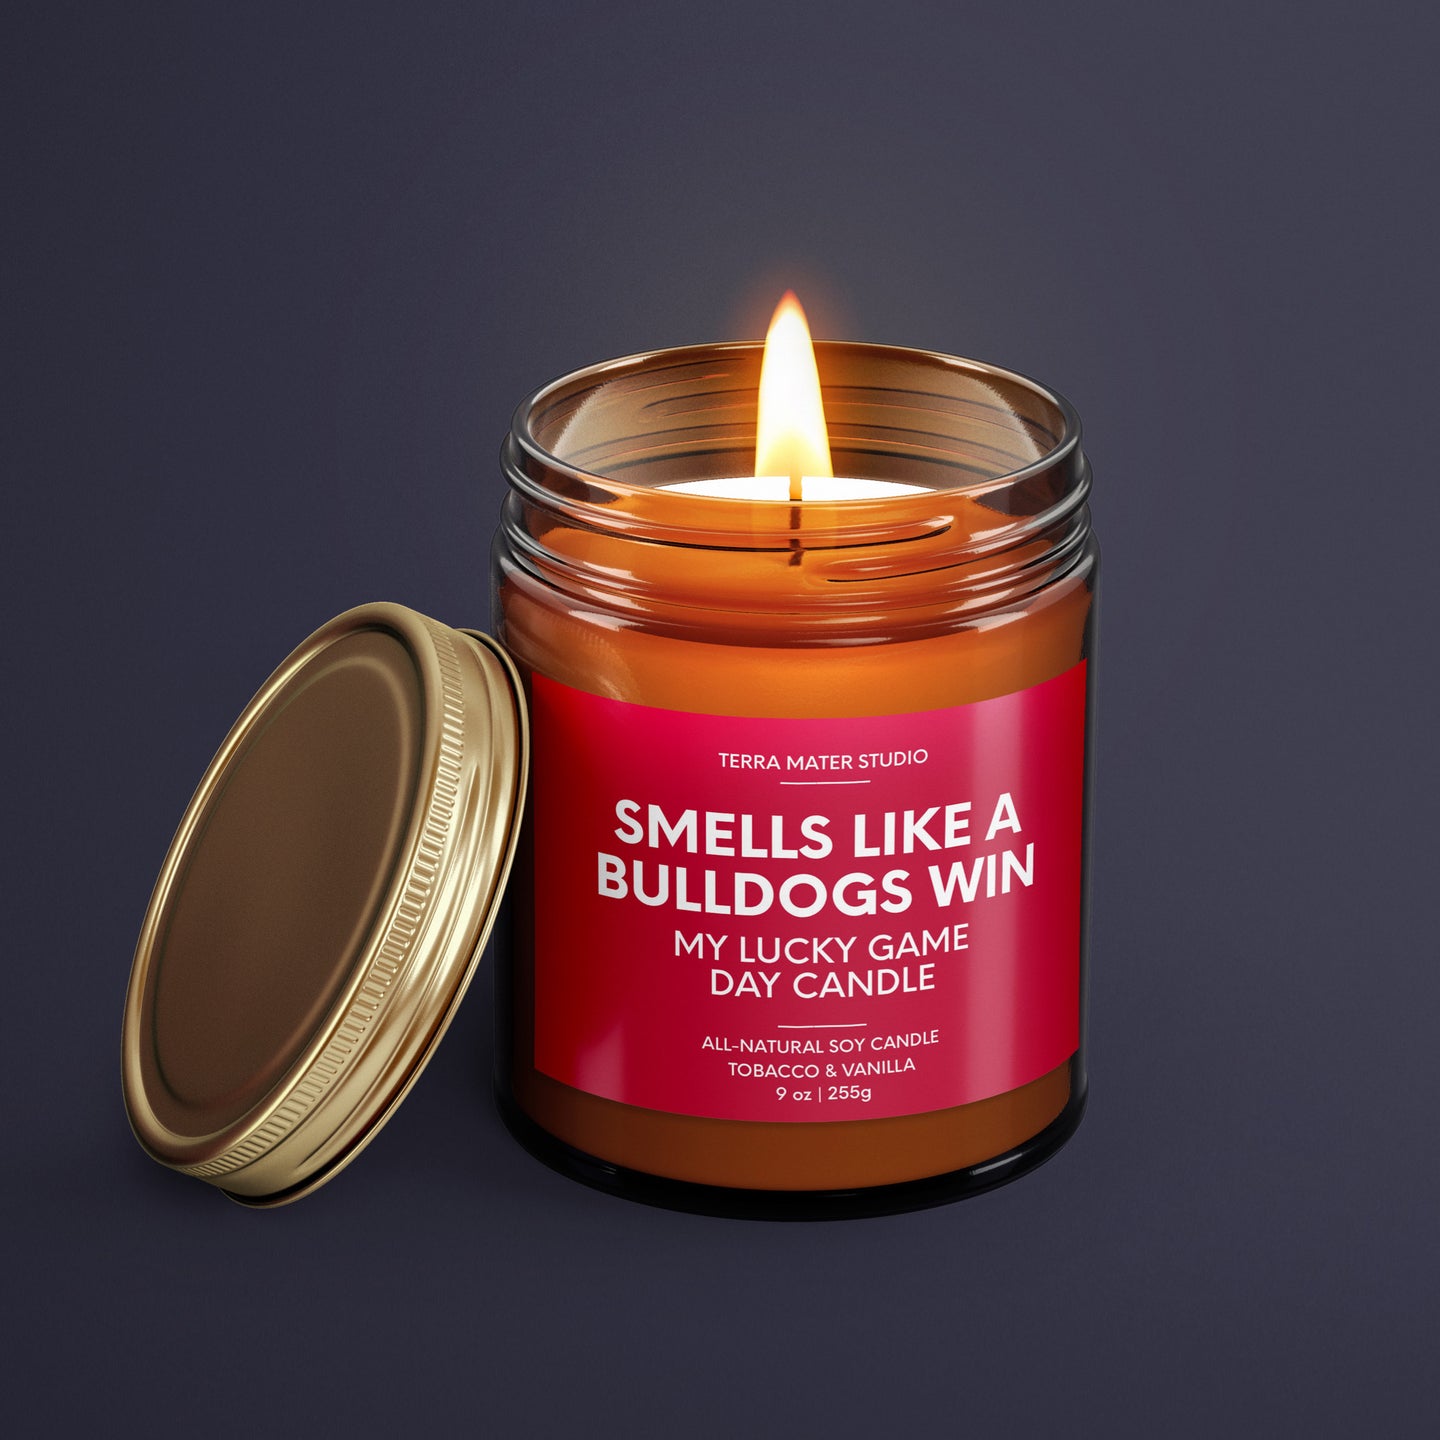 Smells Like A Bulldogs Win | Georgia Lucky Game Day Candle | Soy Wax Candle